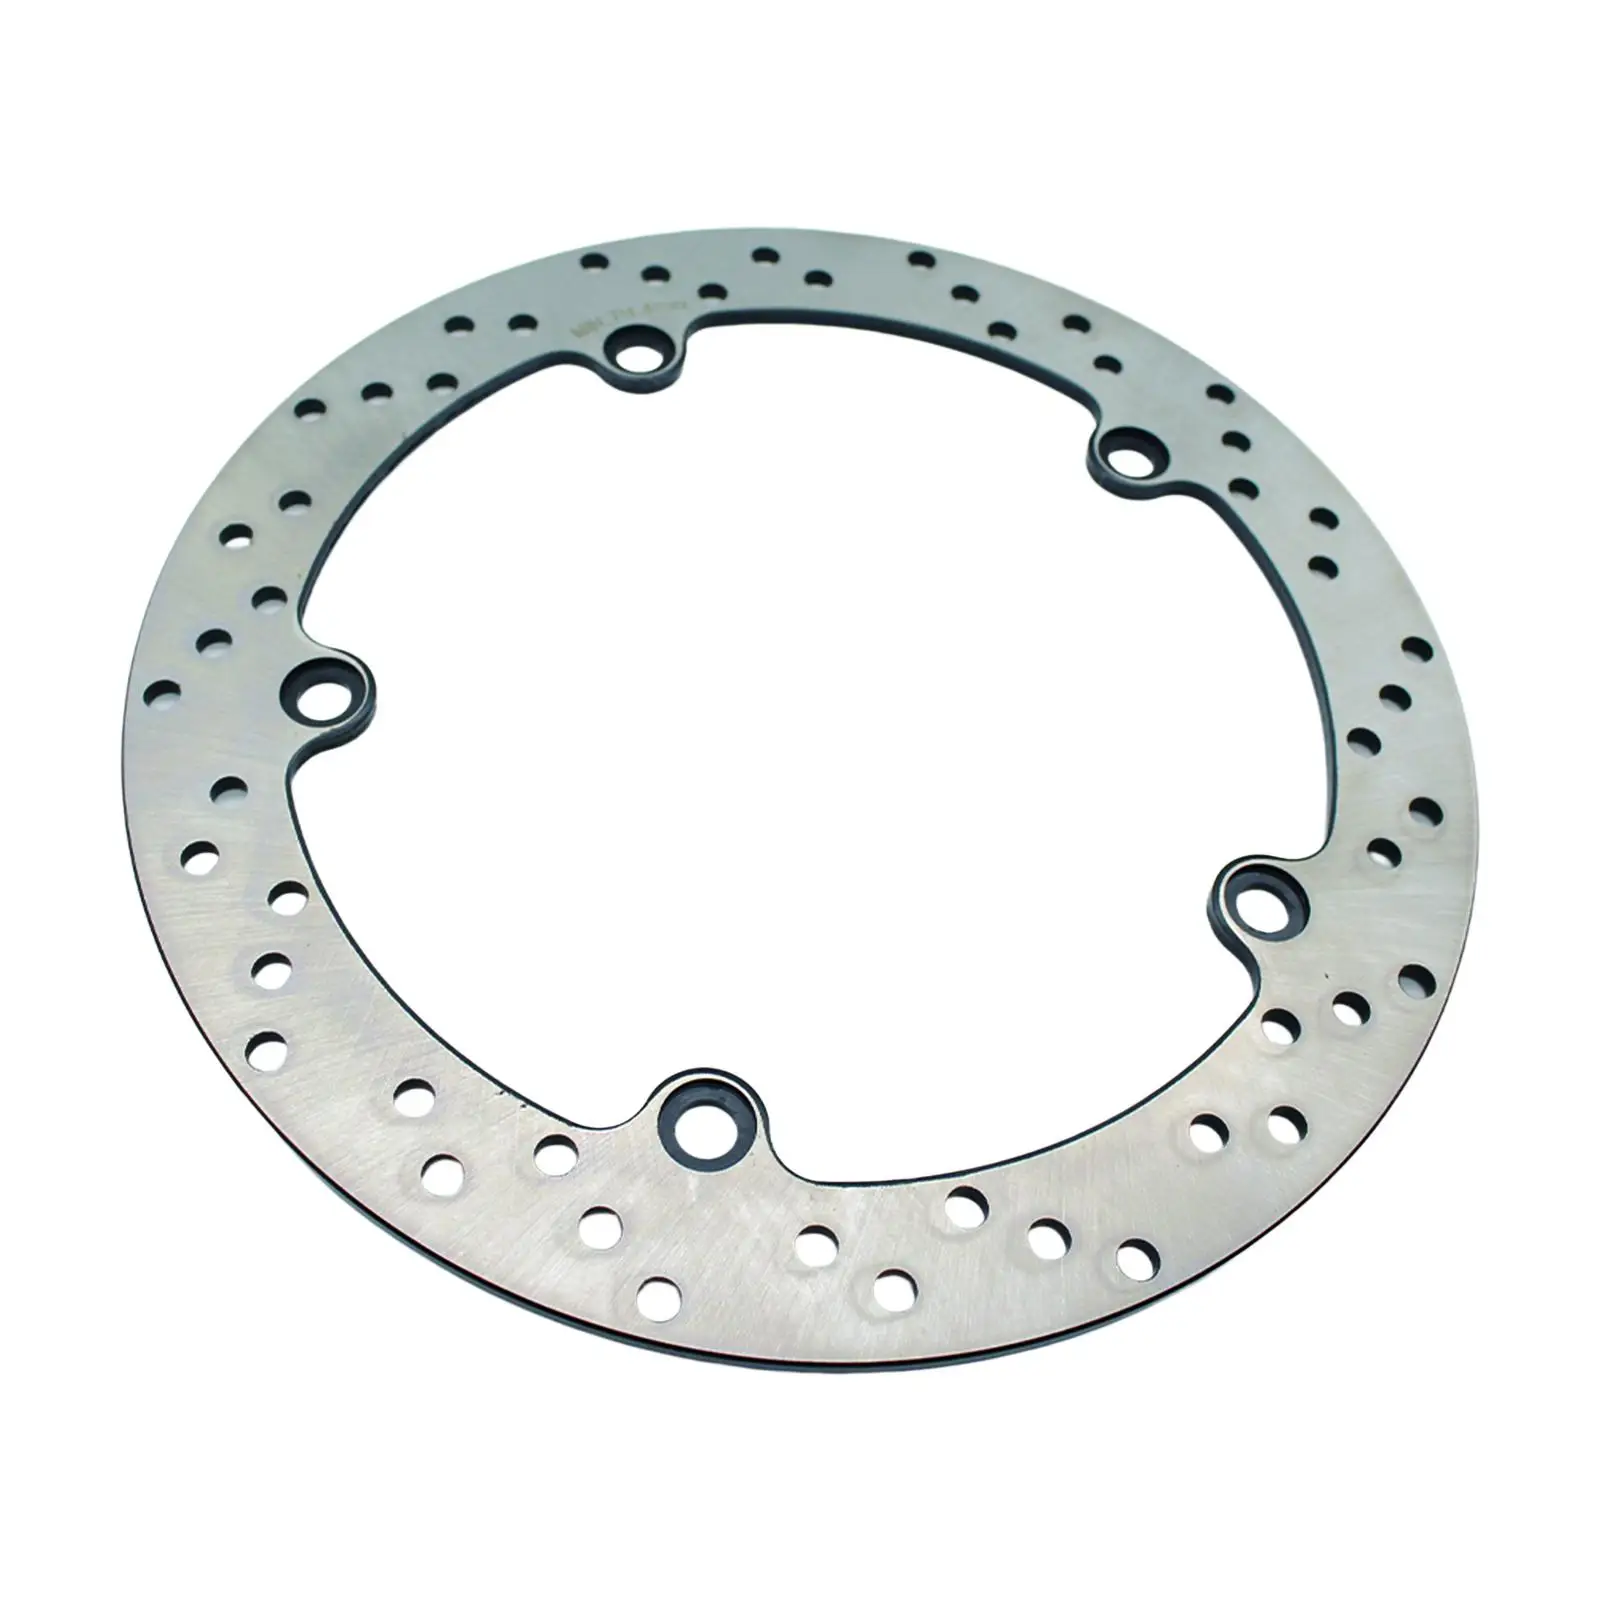 Motorcycle Rear Brake Disc Rotor for BMW R1100GS R1100R Easy to Install